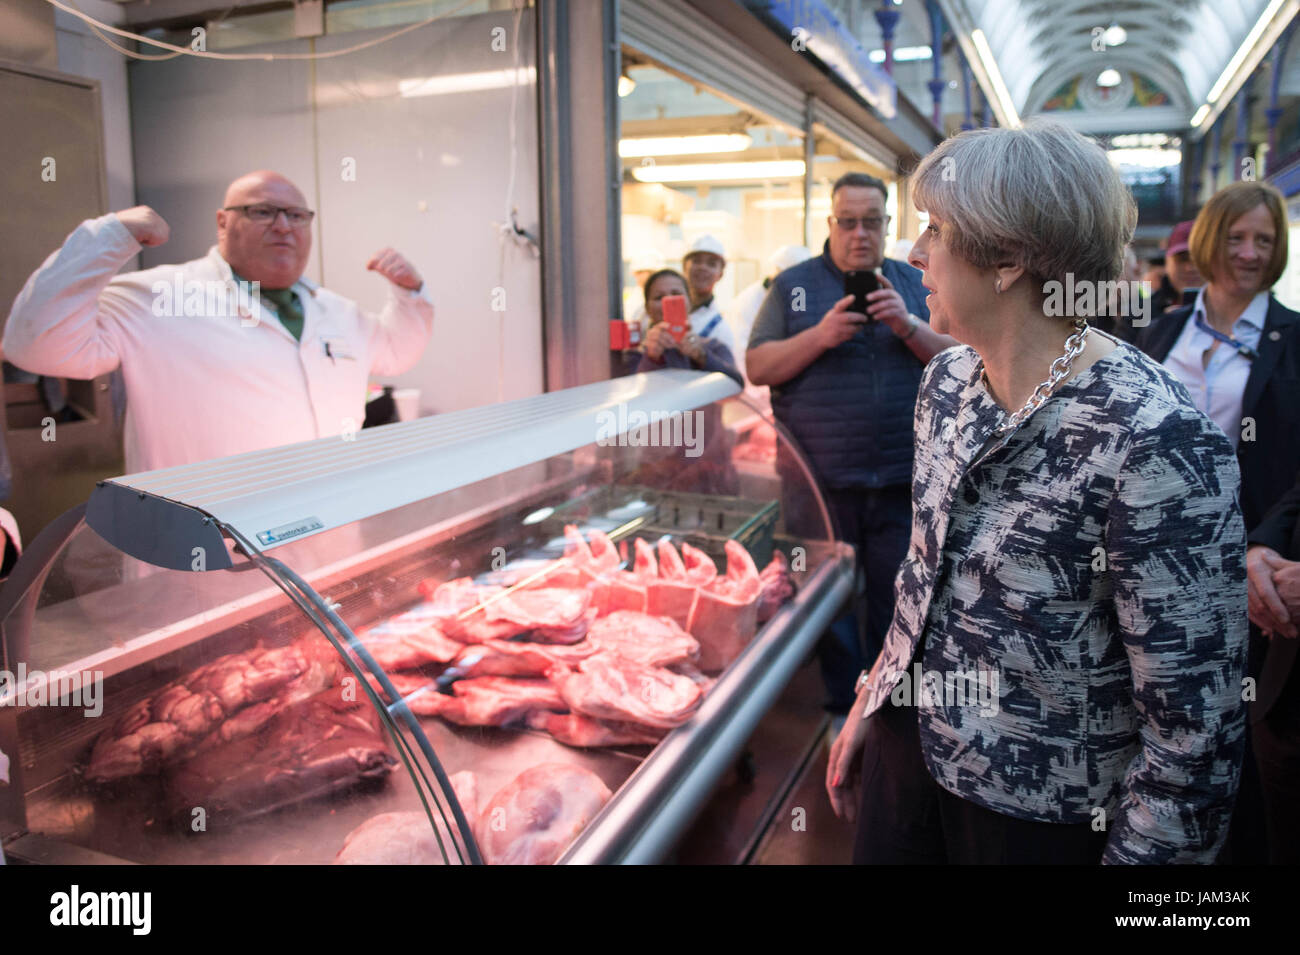 Prime Minister Theresa May visits Smithfield Market in the City of Londo on the final day of campaigning for Thursday's General Election. Stock Photo